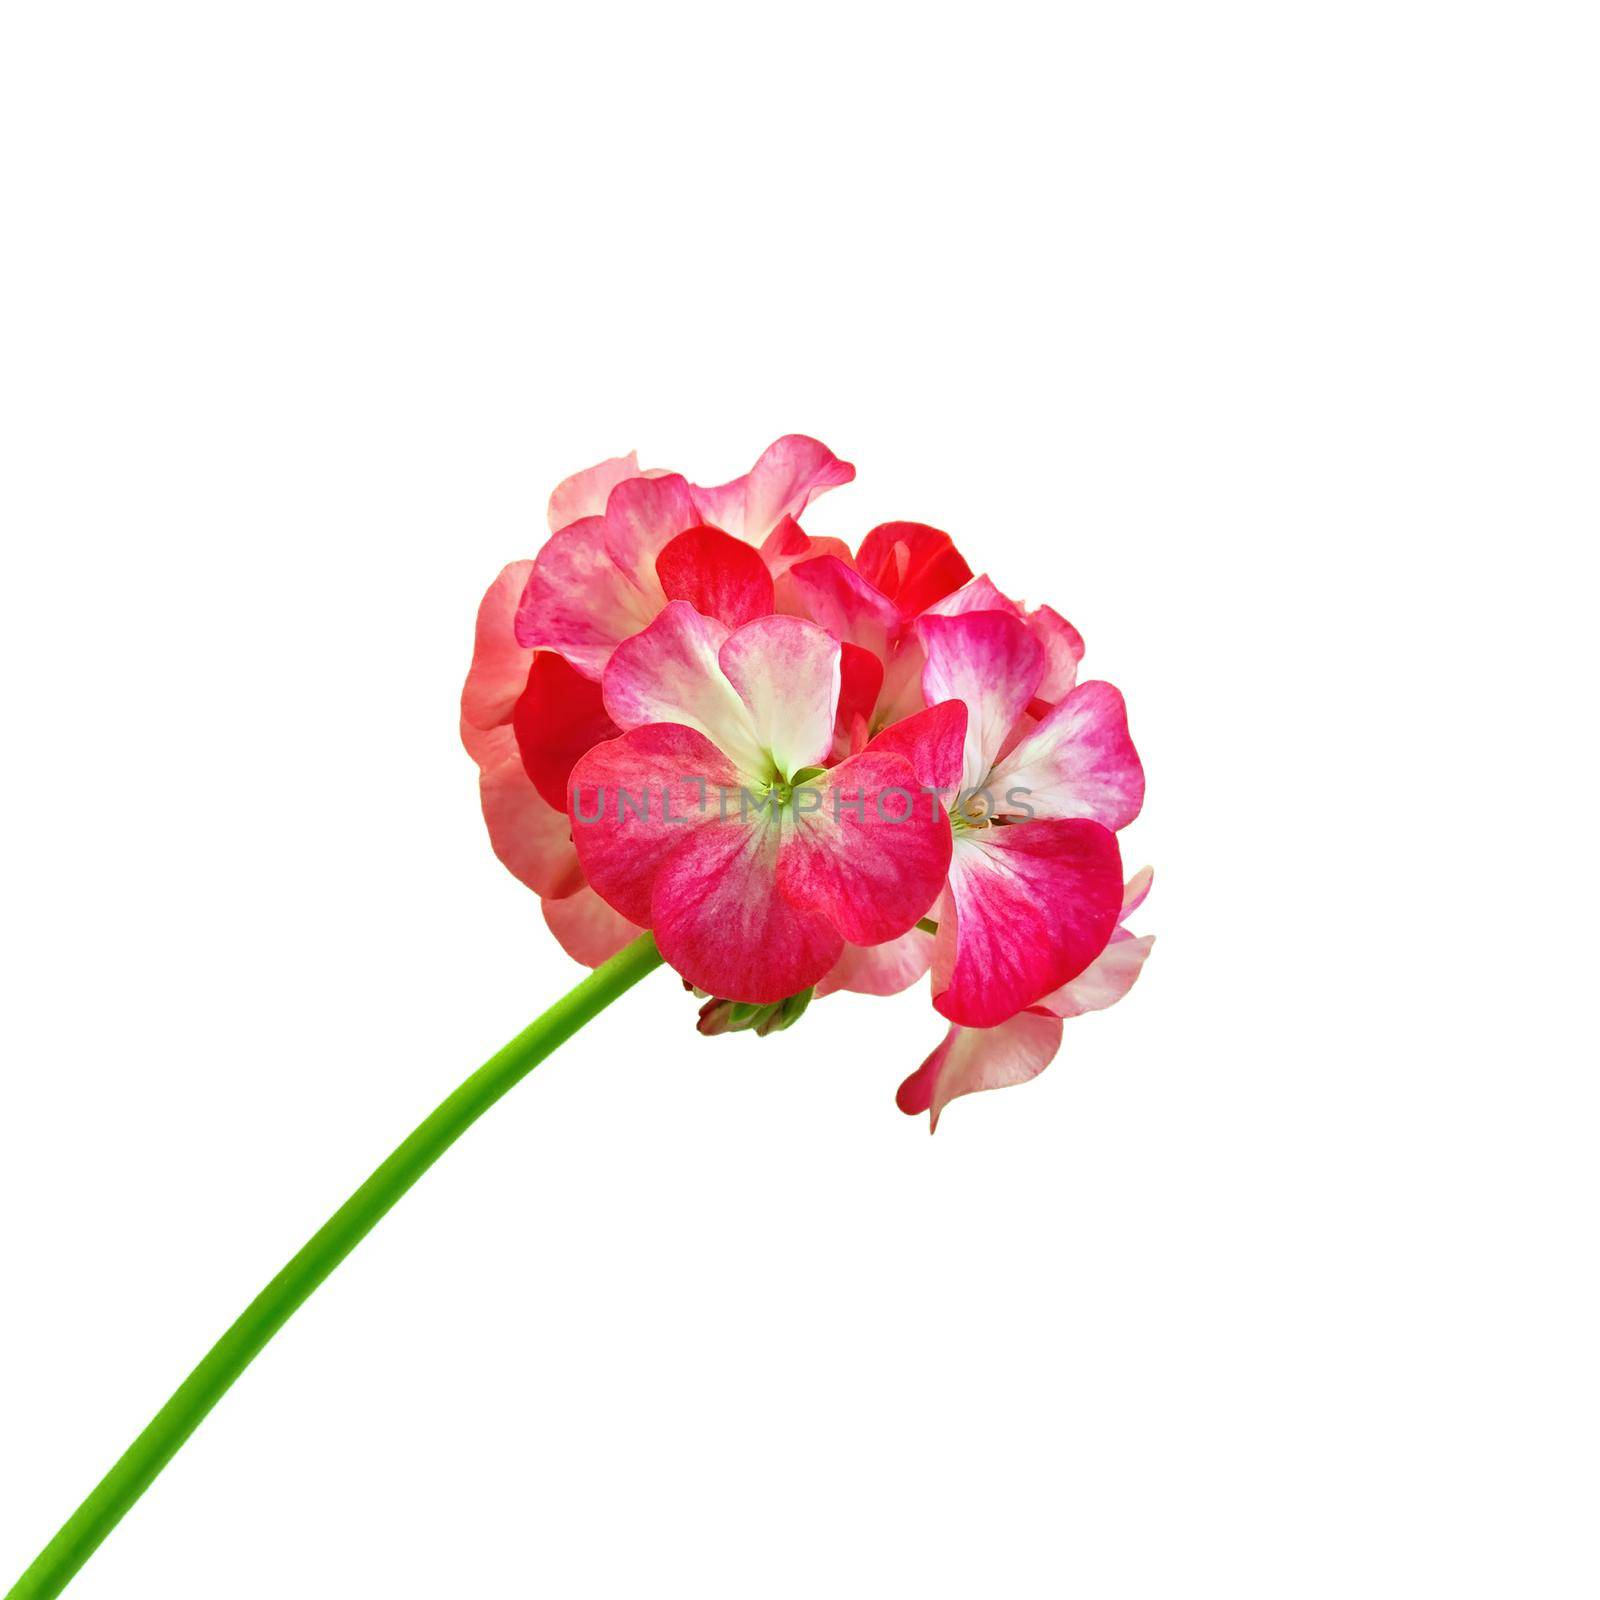 Inflorescence red and white geranium isolated on white background